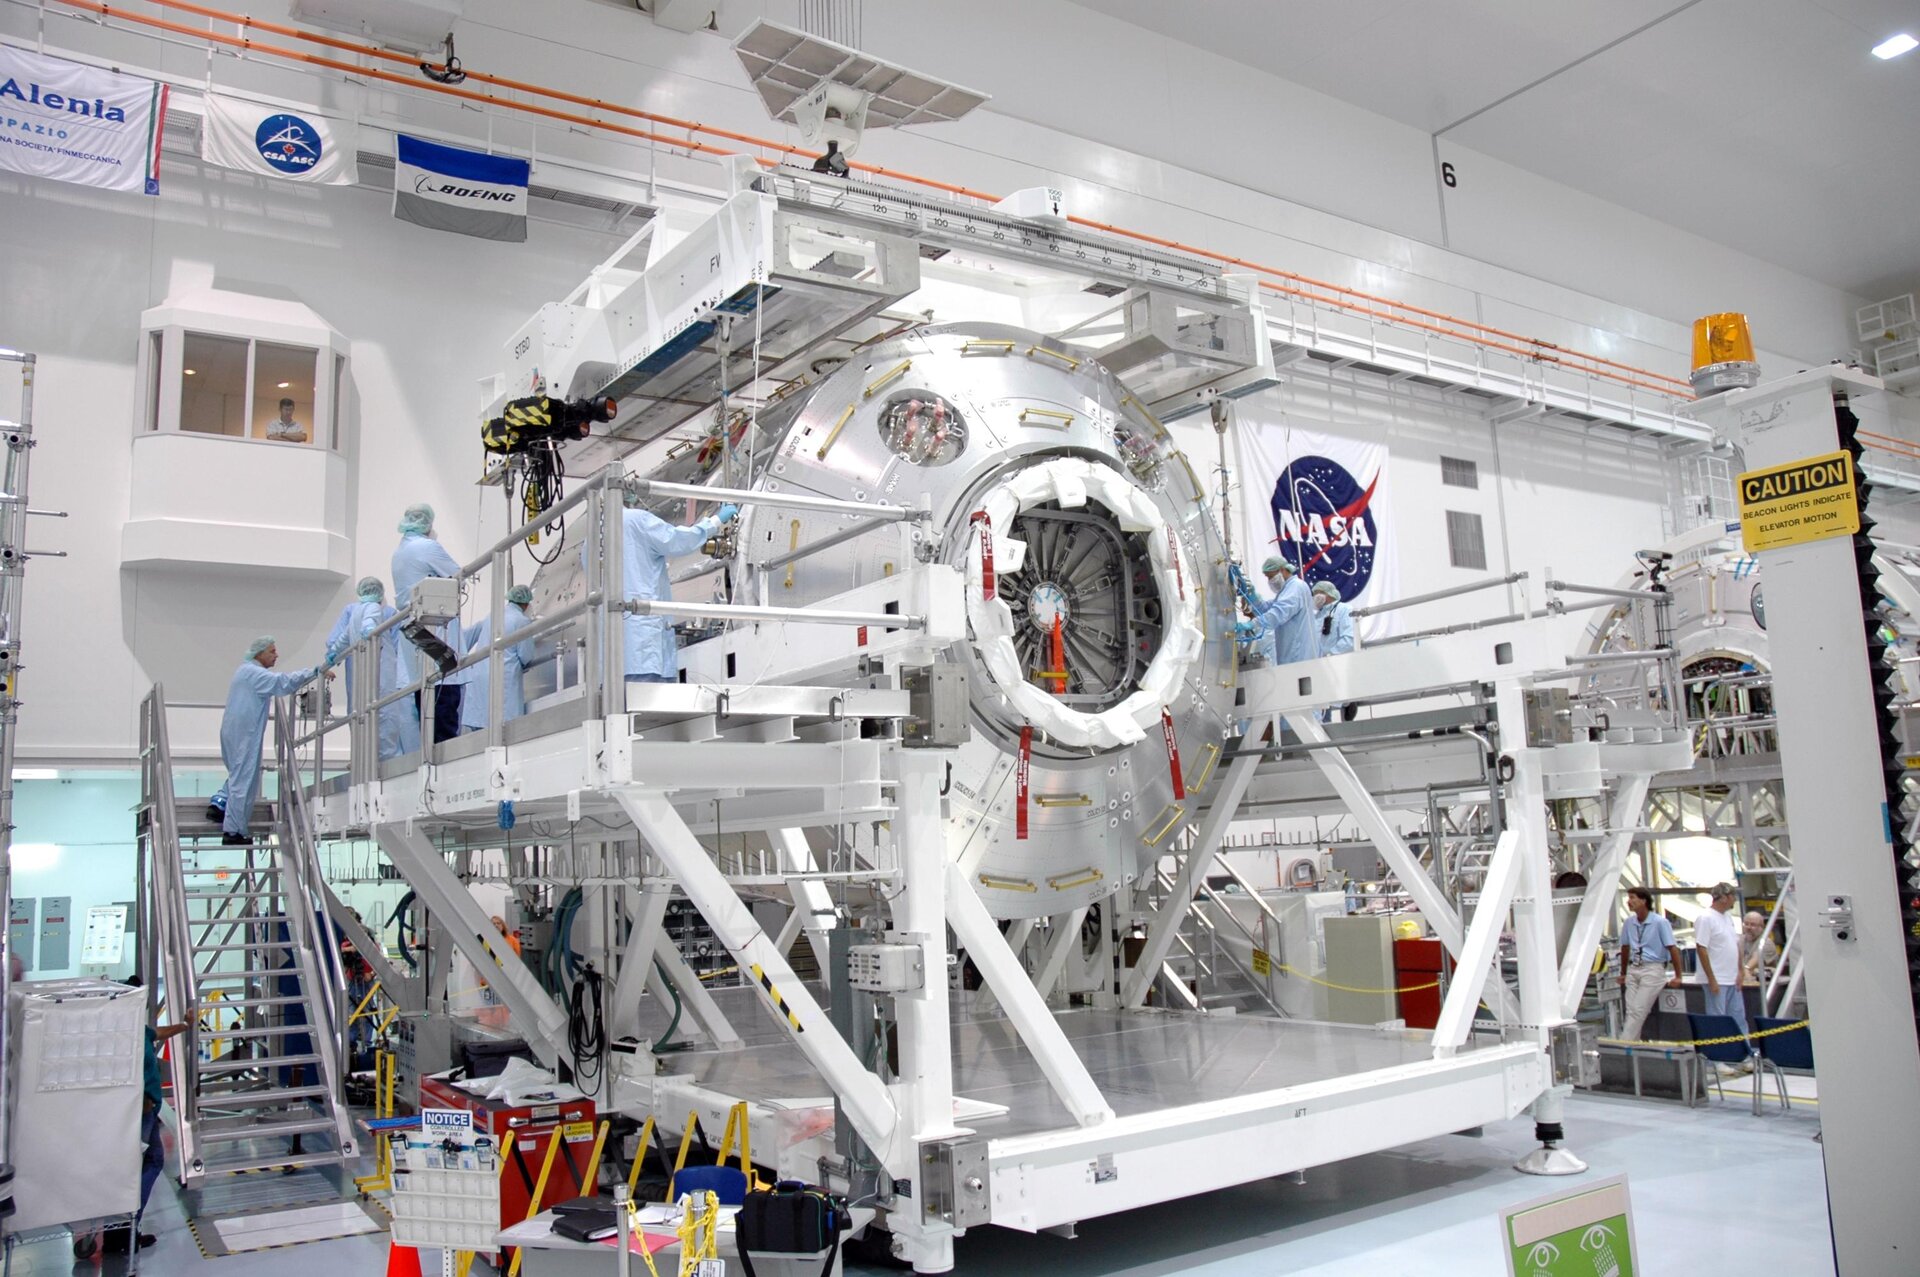 The European Columbus laboratory settles into a new home in the Space Station Processing Facility at NASA's Kennedy Space Center